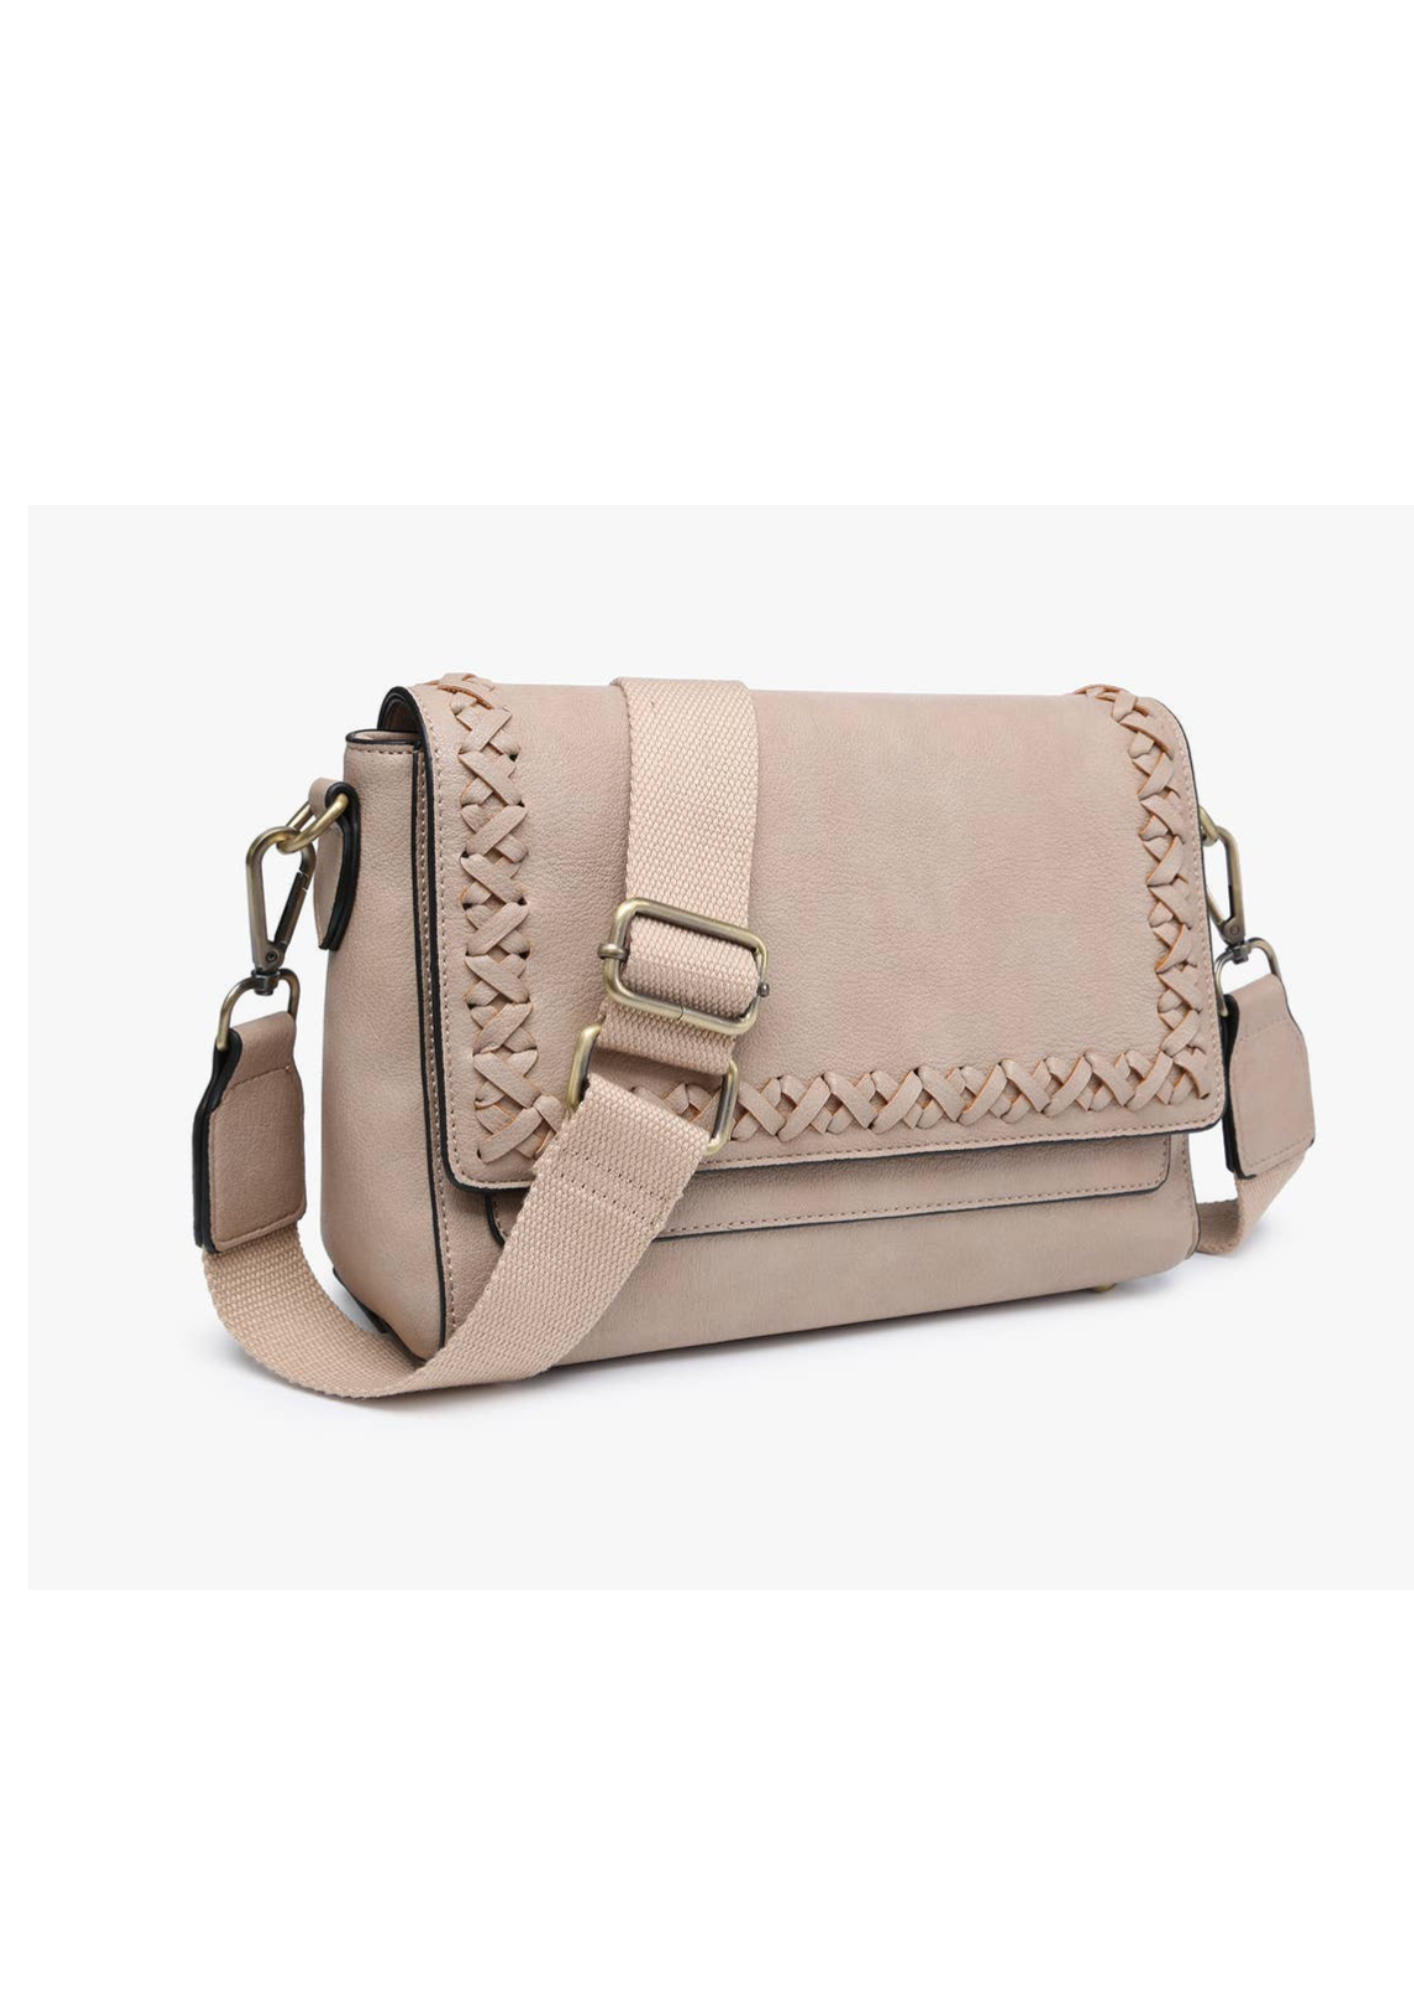 Vegan leather purse on beige with front flap over and stitch details. Flap has a magnetic closure and back has a zipper pocket. Strap is adjustable and can be used as a crossbody or shoulder bag. 